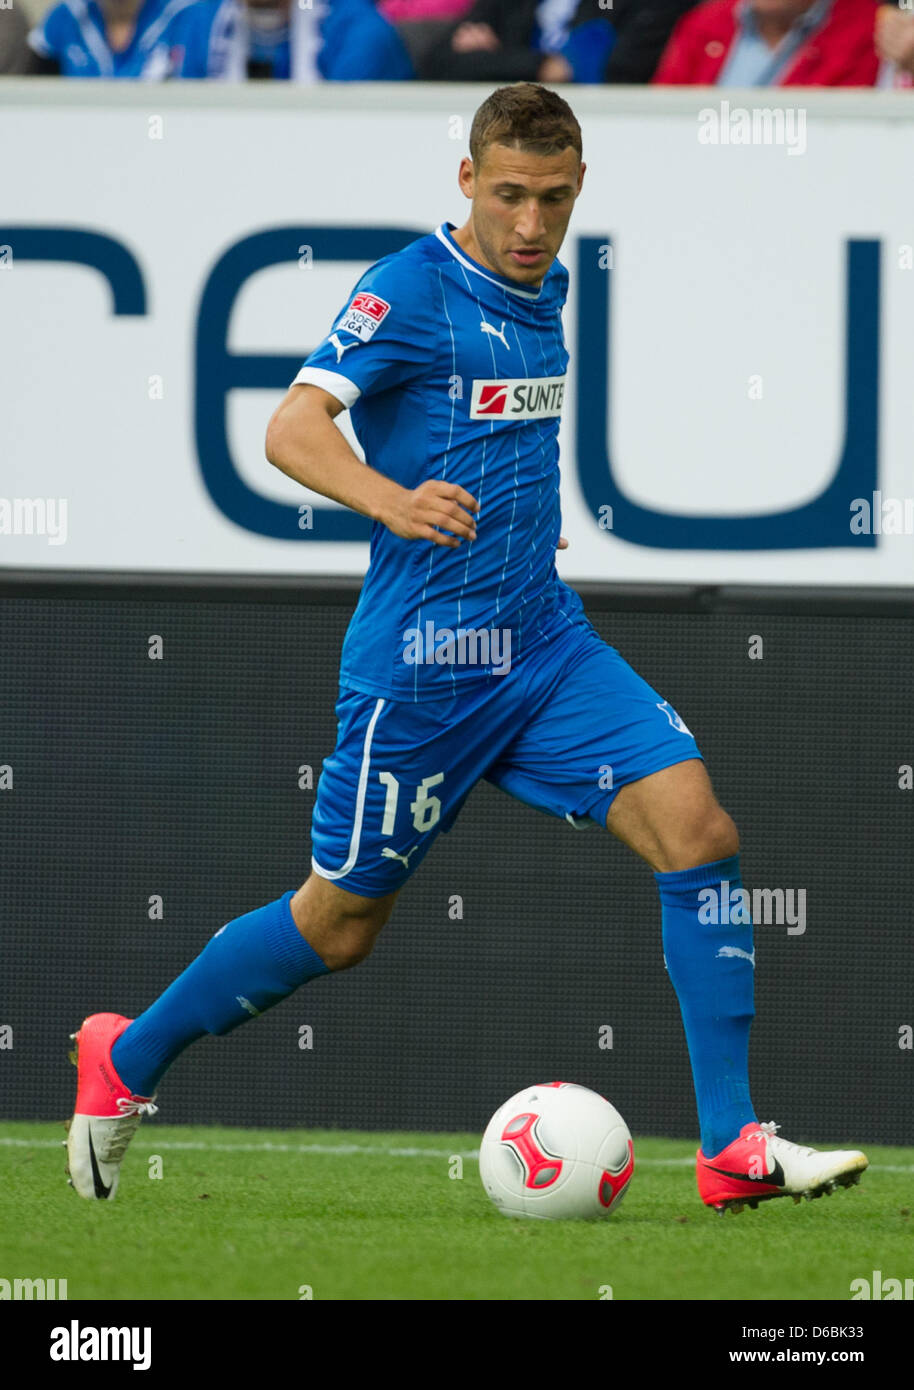 Hoffenheim's Fabian Johnson plays the ball during the German Bundesliga soccer match between TSG 1899 Hoffenheim and Eintracht Frankfurt at the Rhein-Neckar-Arena in Sinsheim, Germany, 01 September 2012. Photo: UWE ANSPACH   (ATTENTION: EMBARGO CONDITIONS! The DFL permits the further utilisation of up to 15 pictures only (no sequntial pictures or video-similar series of pictures al Stock Photo